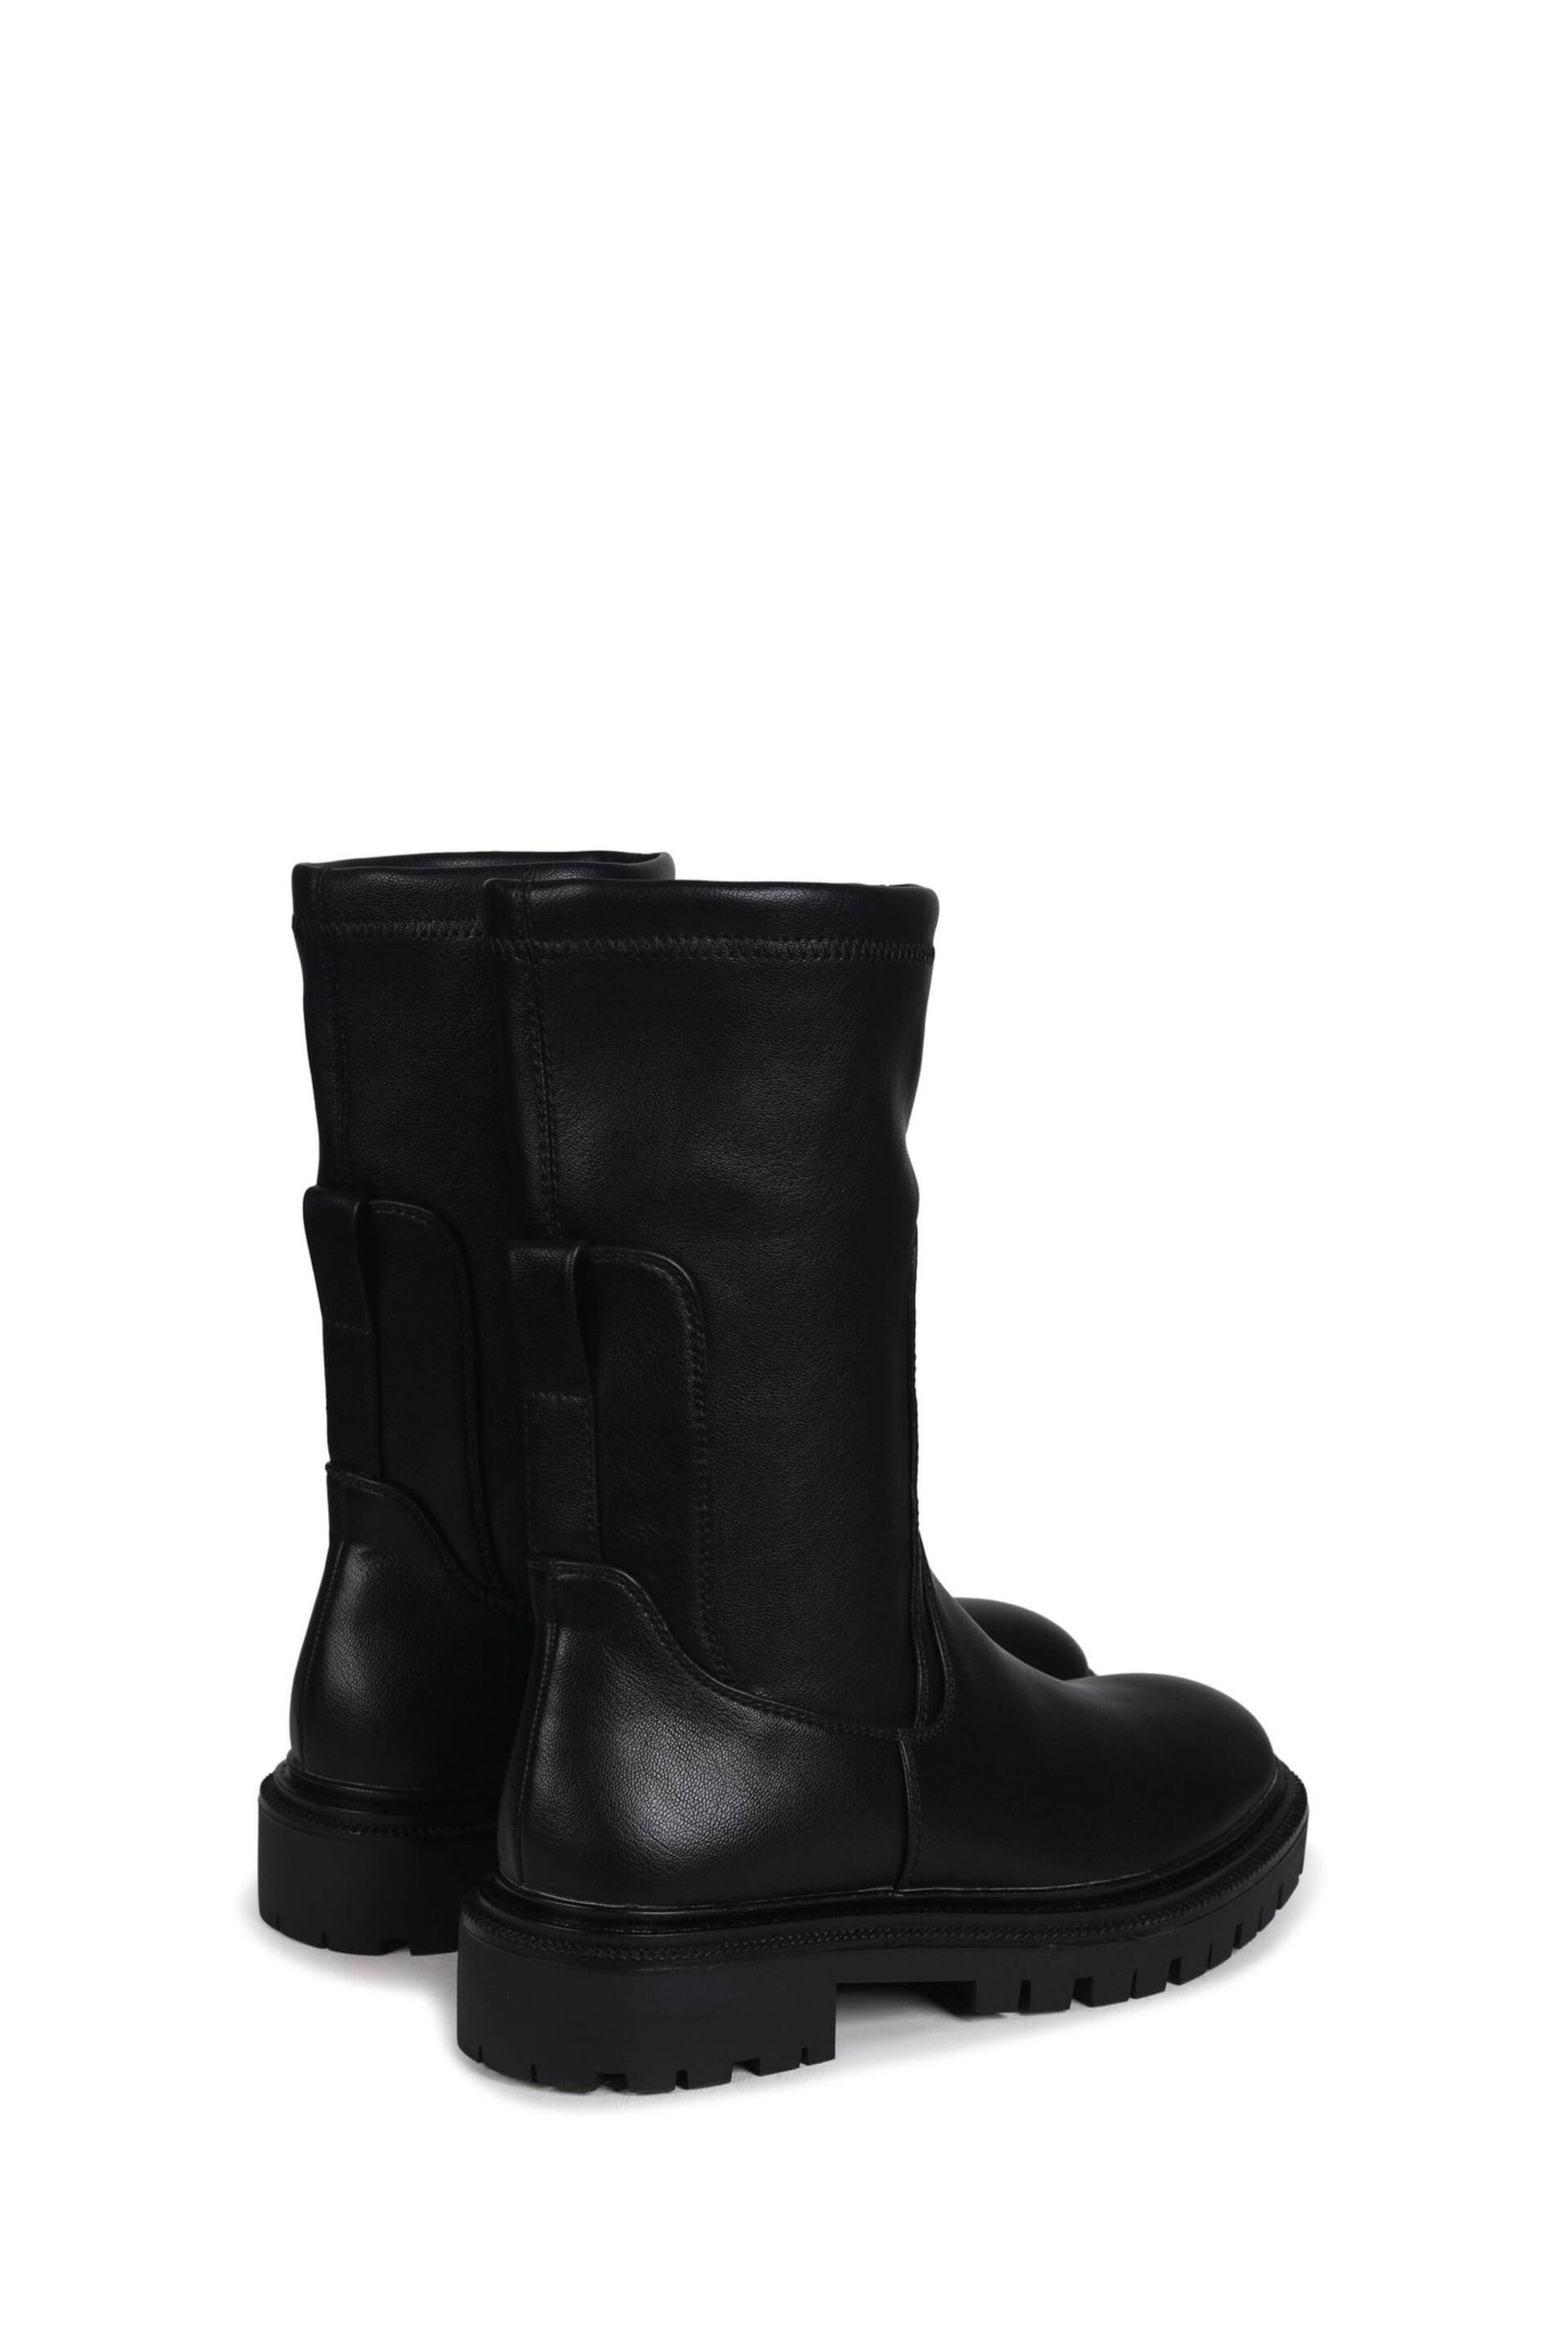 Linzi Black Peggy Pull On Mid Chelsea Boots - Image 4 of 4